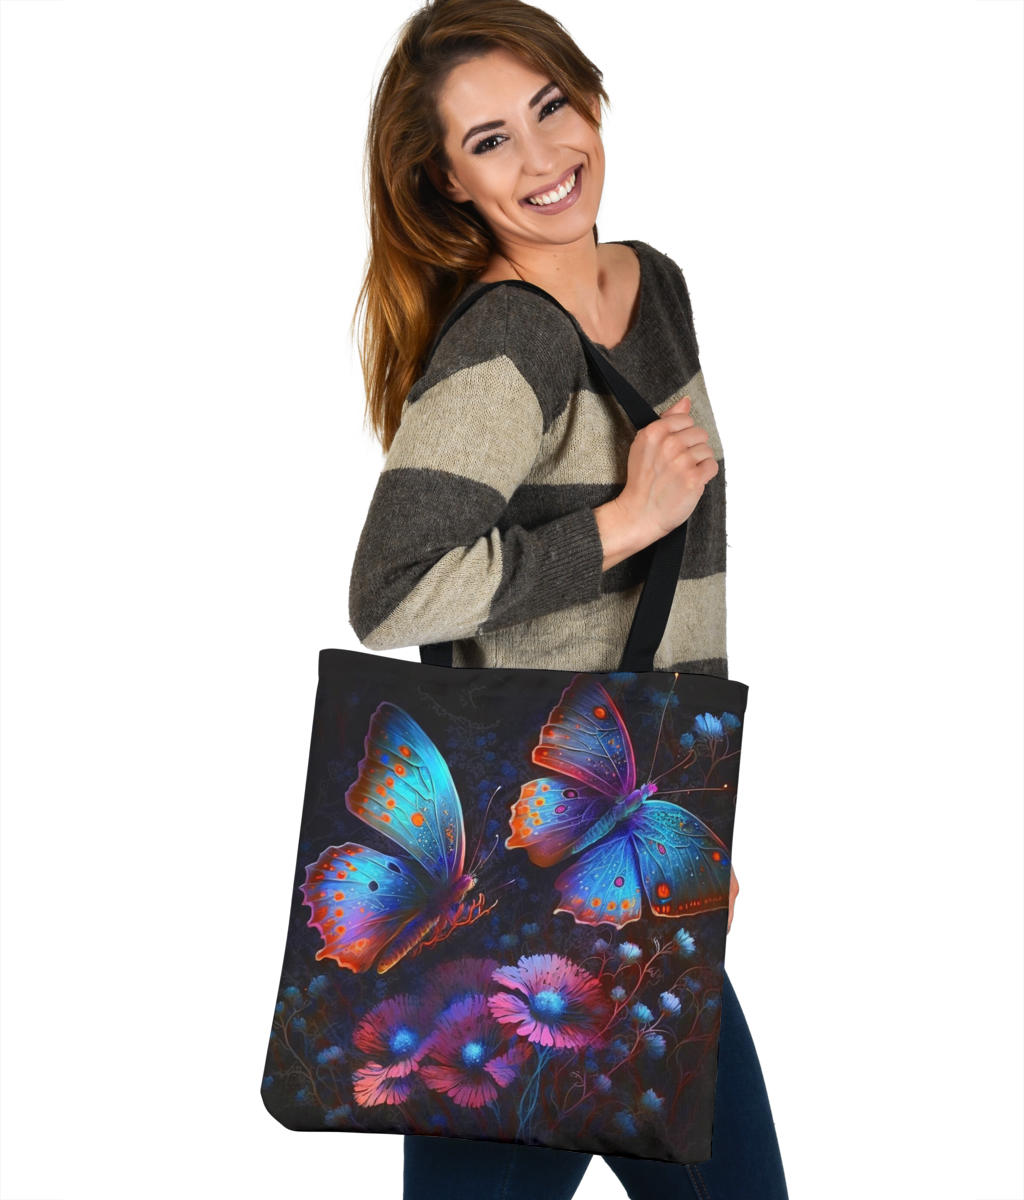 Watercolor Painted Cosmic Neon Butterflies and Flowers Design Tote Bags - Imagination Collection